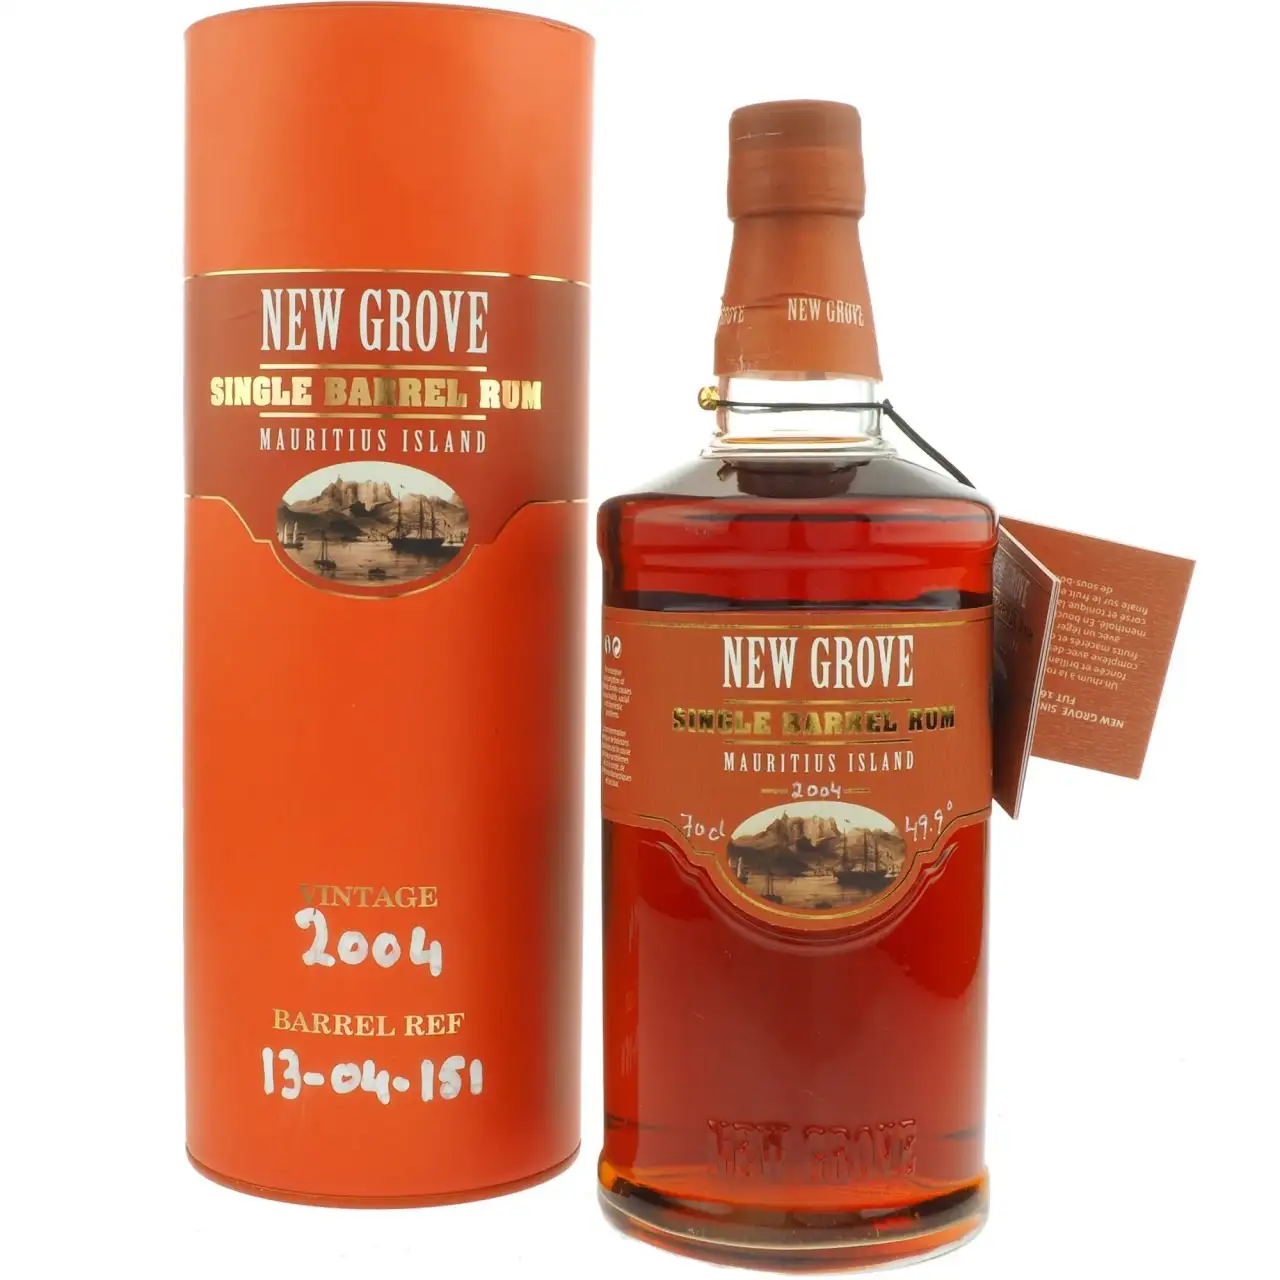 Image of the front of the bottle of the rum New Grove Savoir Faire Single Cask (20 Vin)